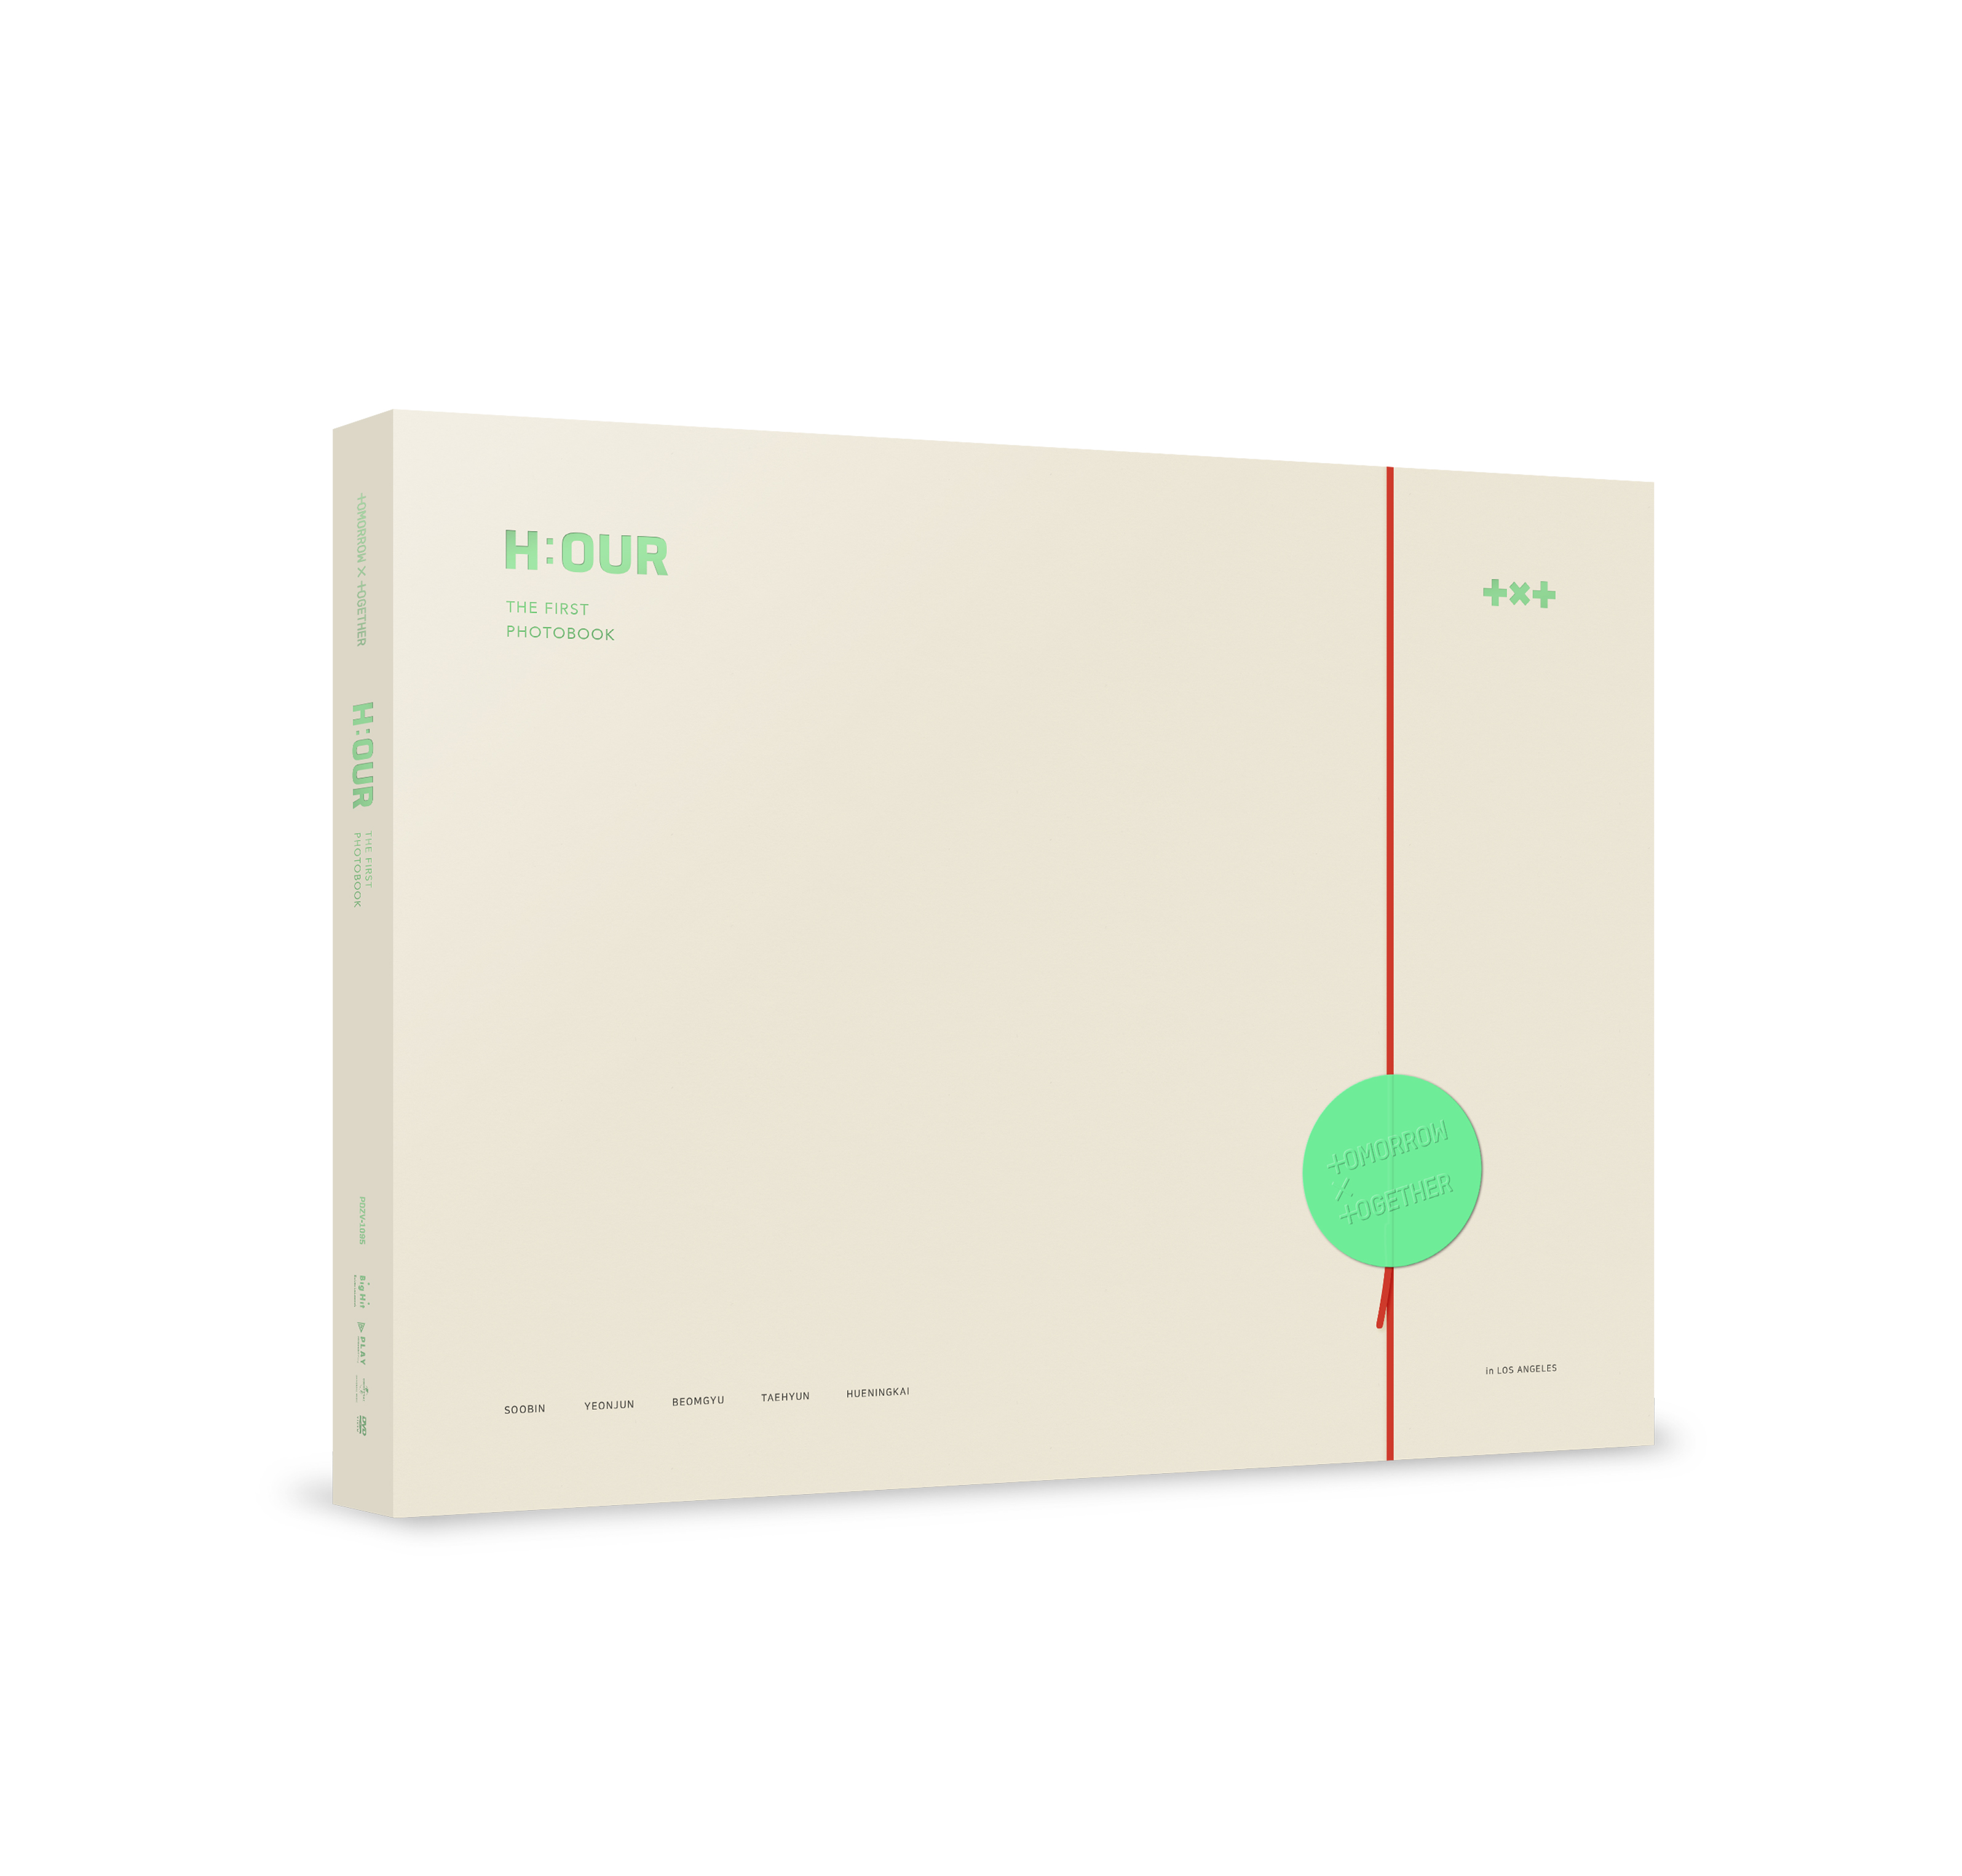 TXT H:OUR THE FIRST PHOTOBOOK